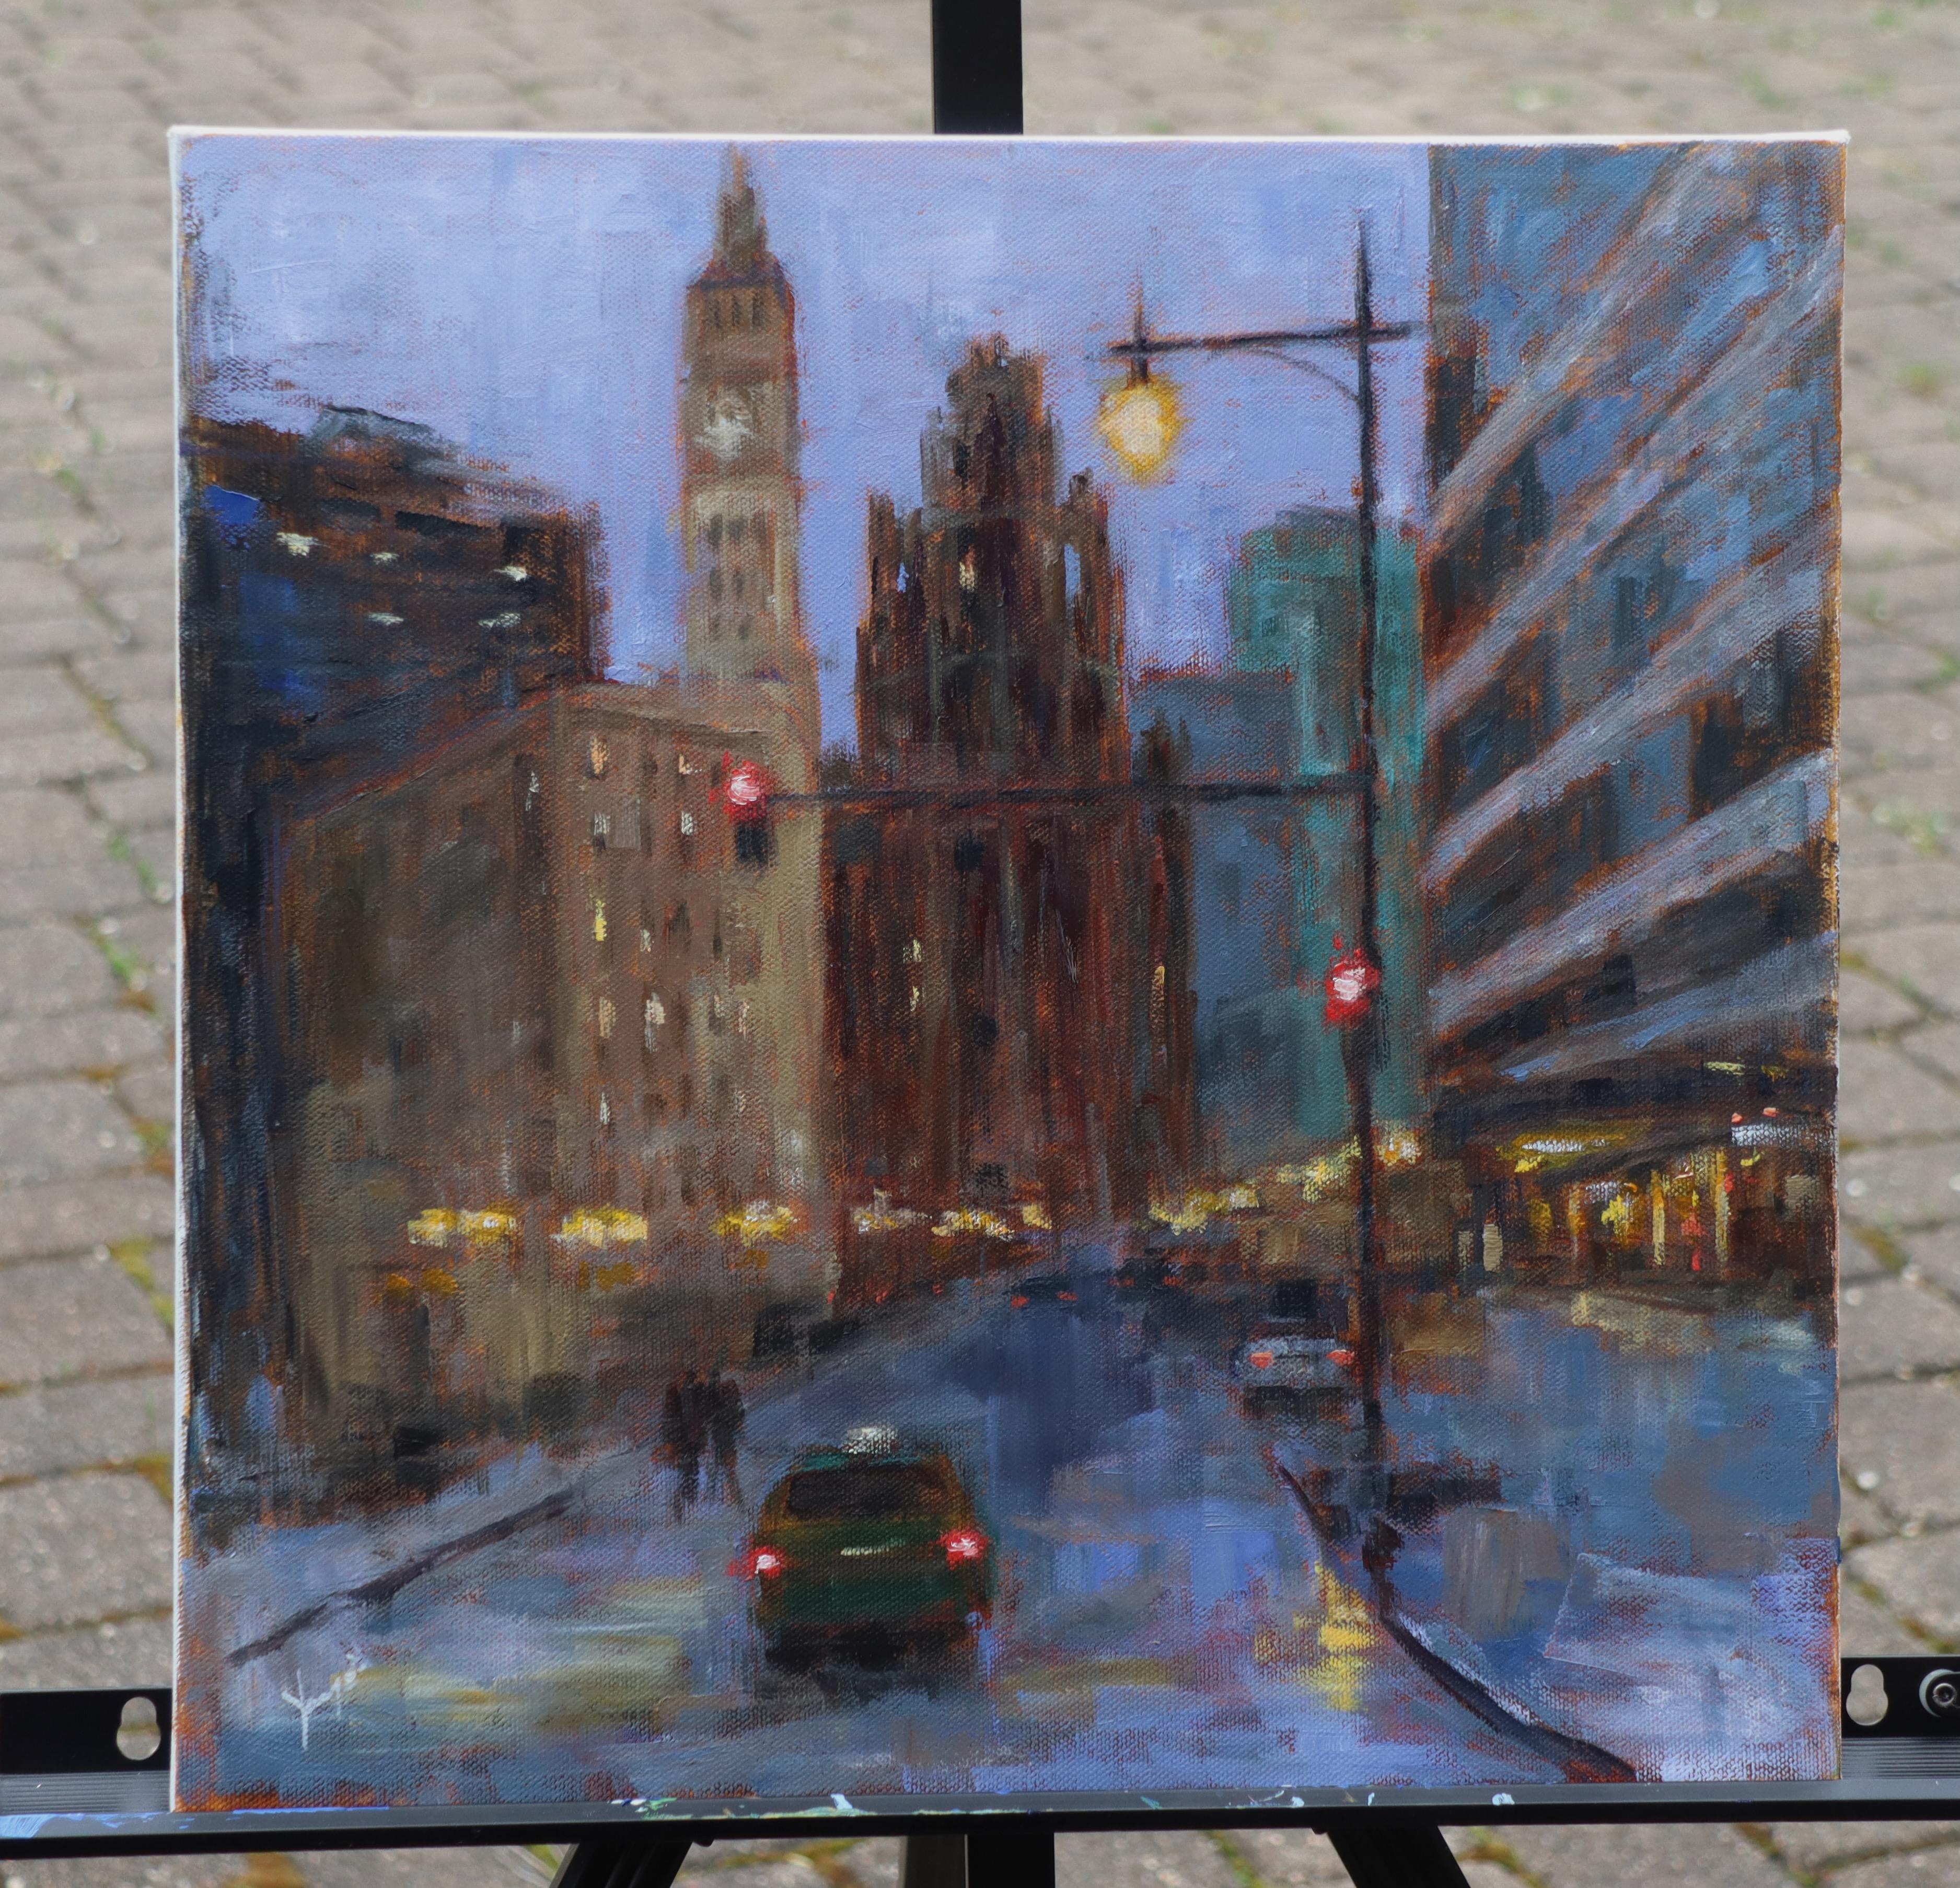 <p>Artist Comments<br>Set during an evening on Wacker Drive, the artwork offers an atmospheric view of Chicago, featuring the iconic Tribune Tower and surrounding buildings. The streetlights and vehicle headlights provide warm, glowing contrasts to